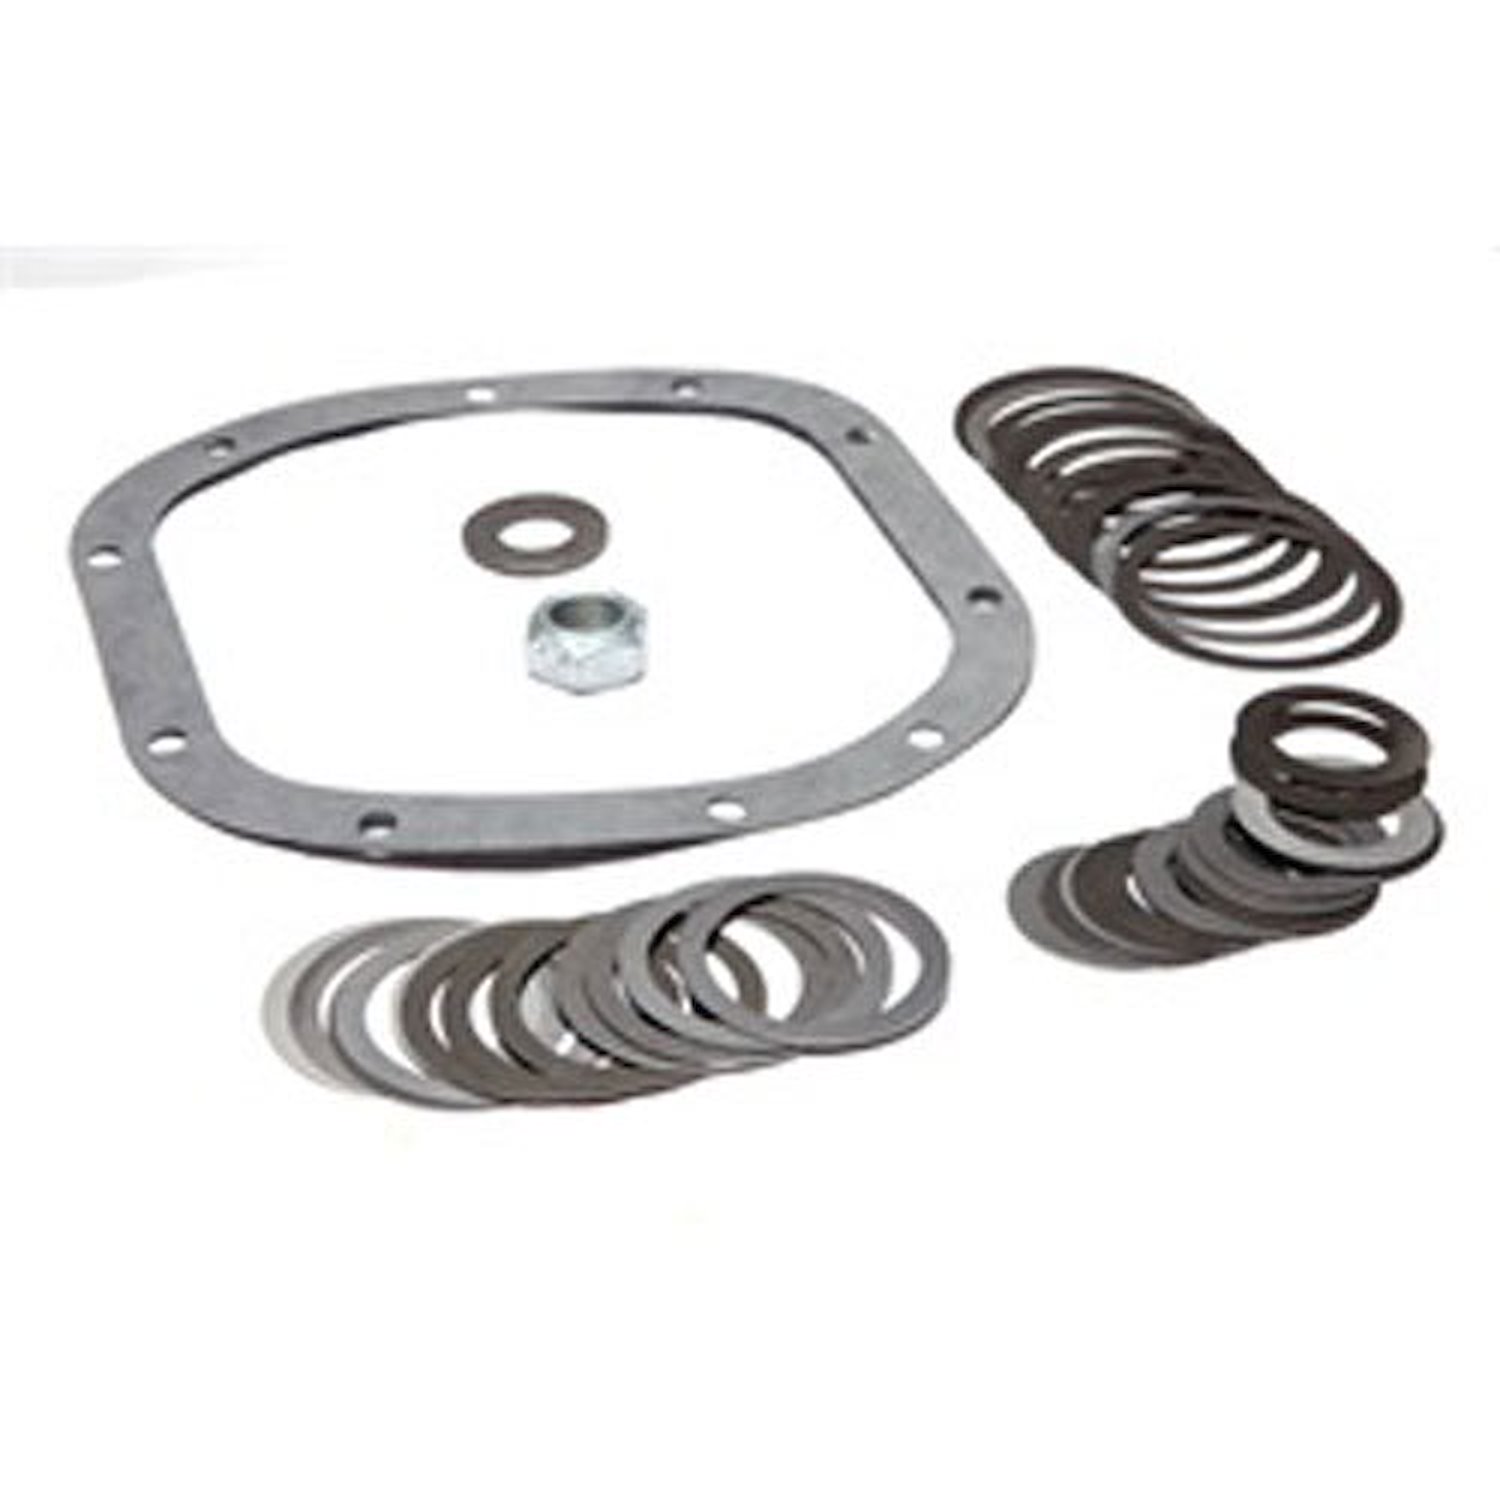 This pinion bearing shim kit from Omix-ADA is for Dana 30 front axle found in 93-98 Jeep Grand Cherokees and 97-06 Wranglers.